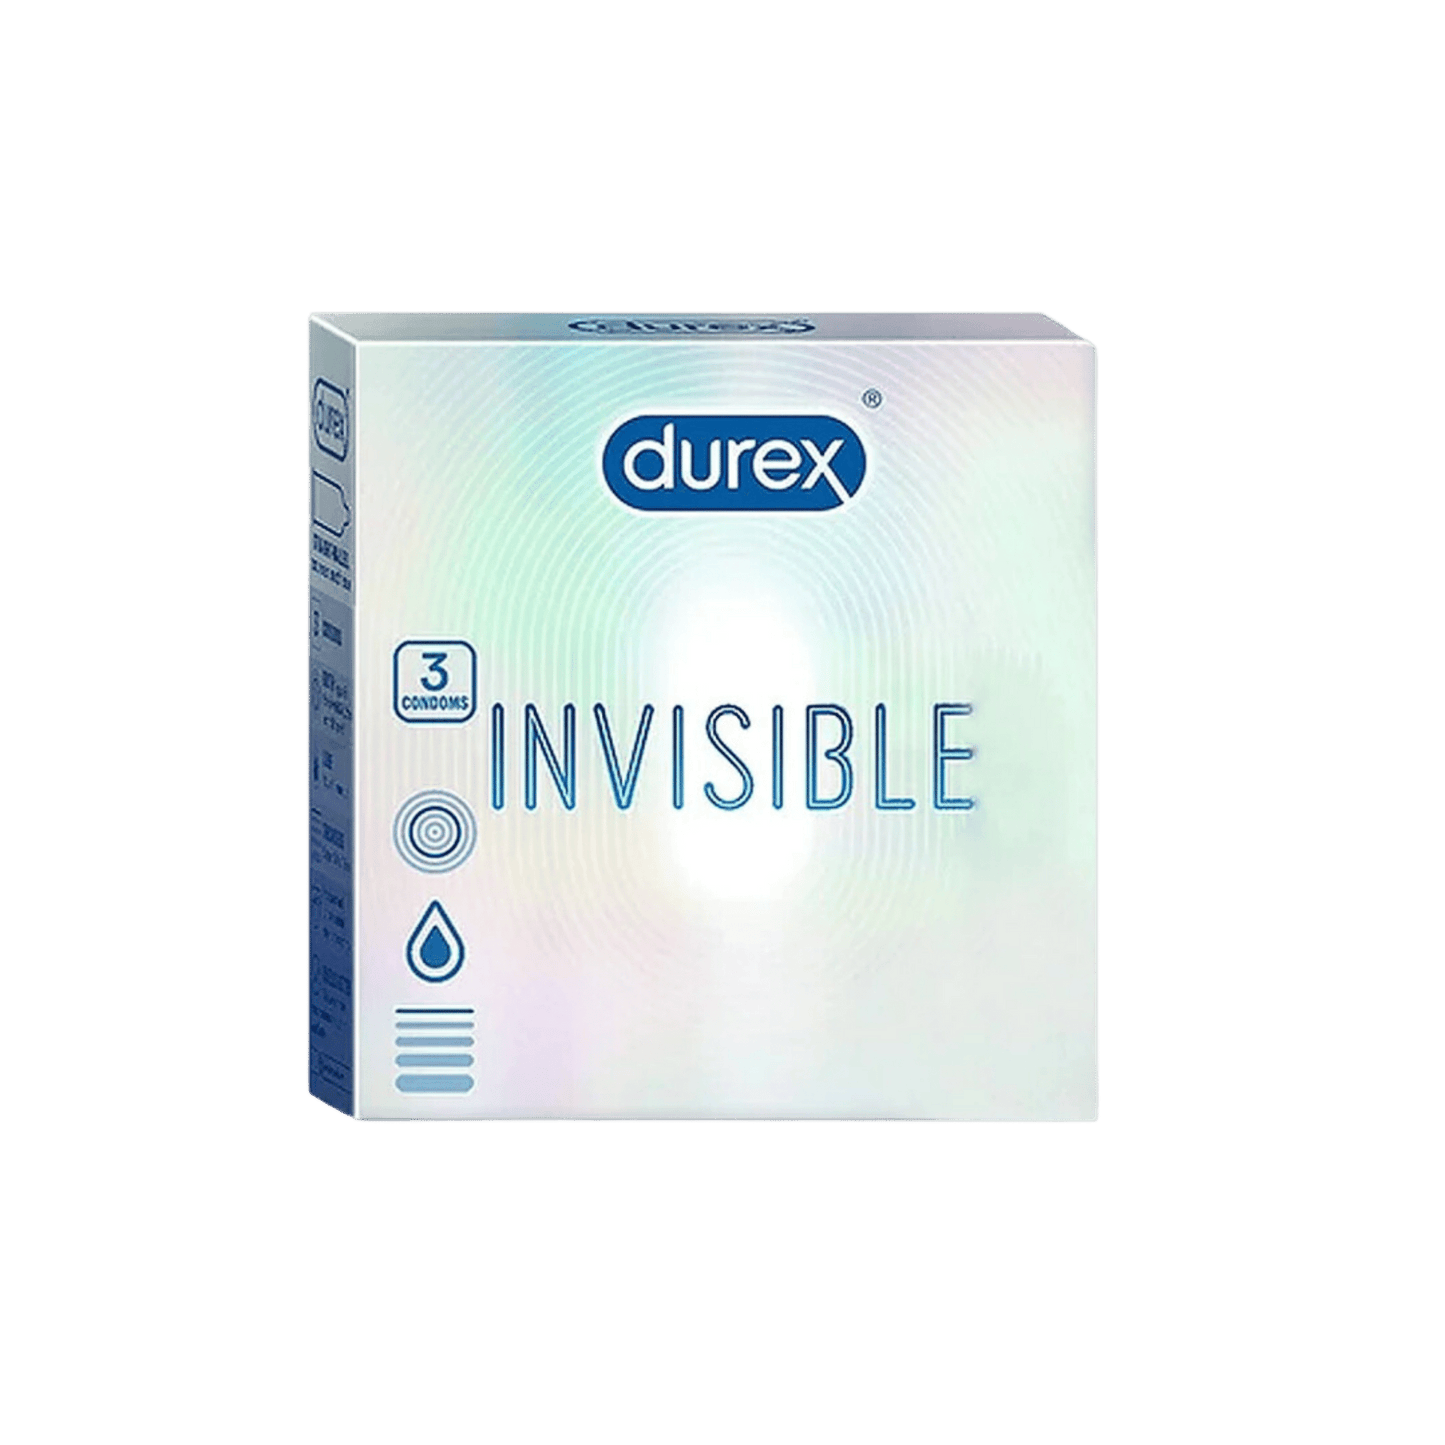 Buy Durex Invisible Extra Thin in Pakistan!